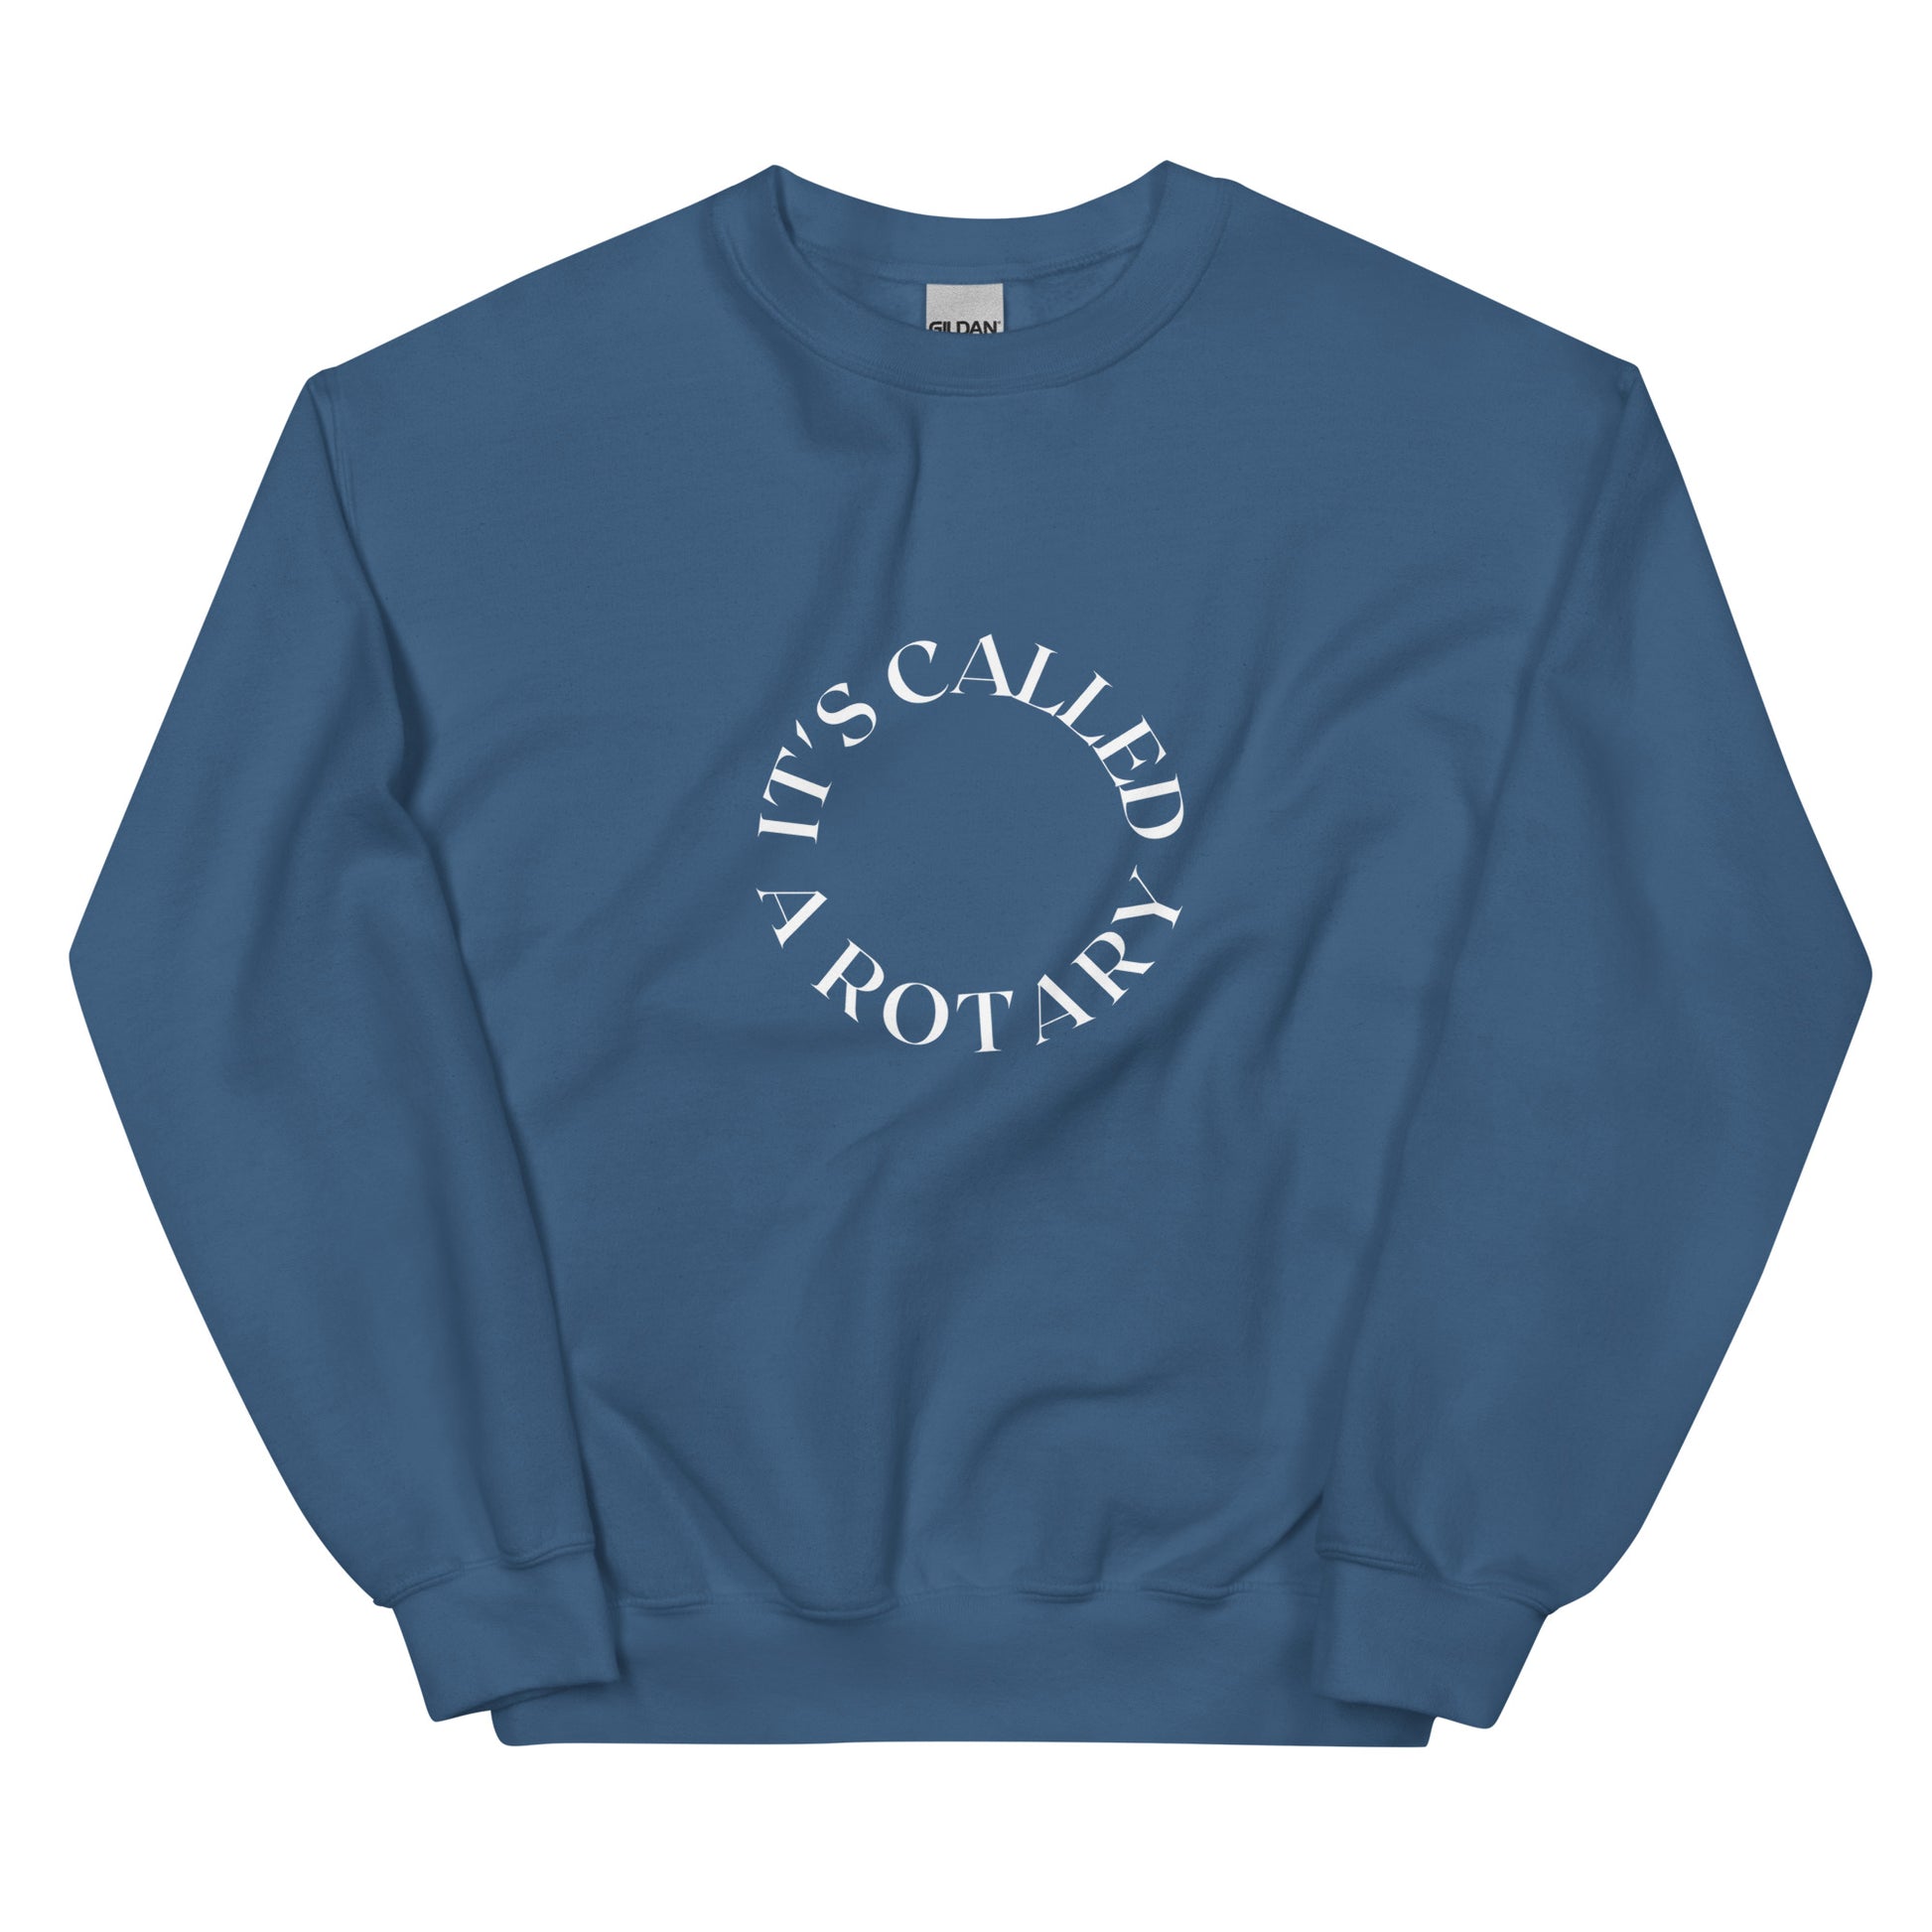 indigo crewneck that says "it's called a rotary" in white lettering shaped in a circle